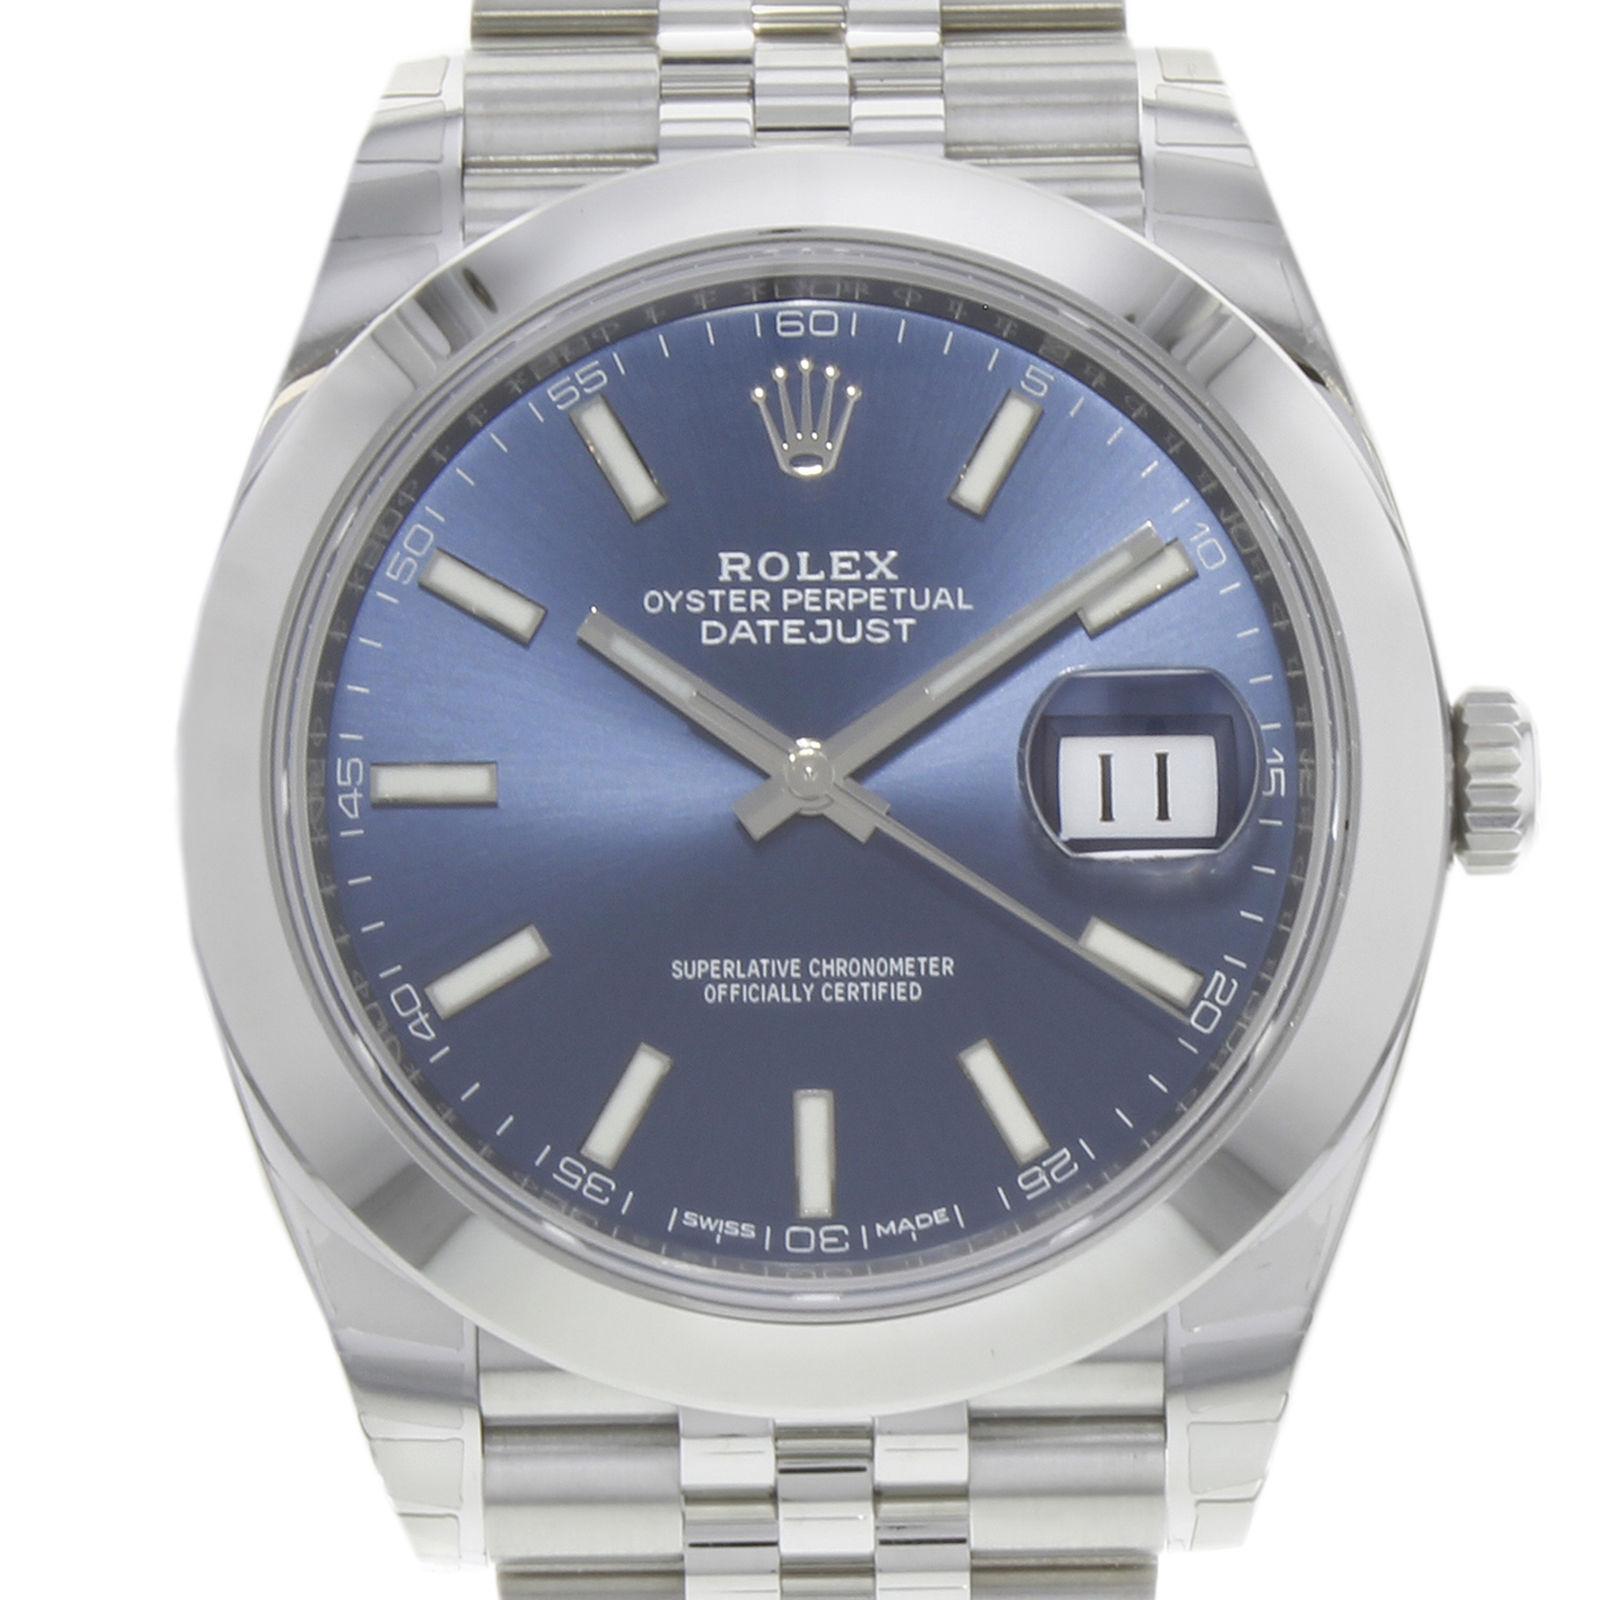 (19537)
This brand new Rolex Datejust 41 126300 blij is a beautiful men's timepiece that is powered by an automatic movement which is cased in a stainless steel case. It has a round shape face, date dial and has hand sticks style markers. It is